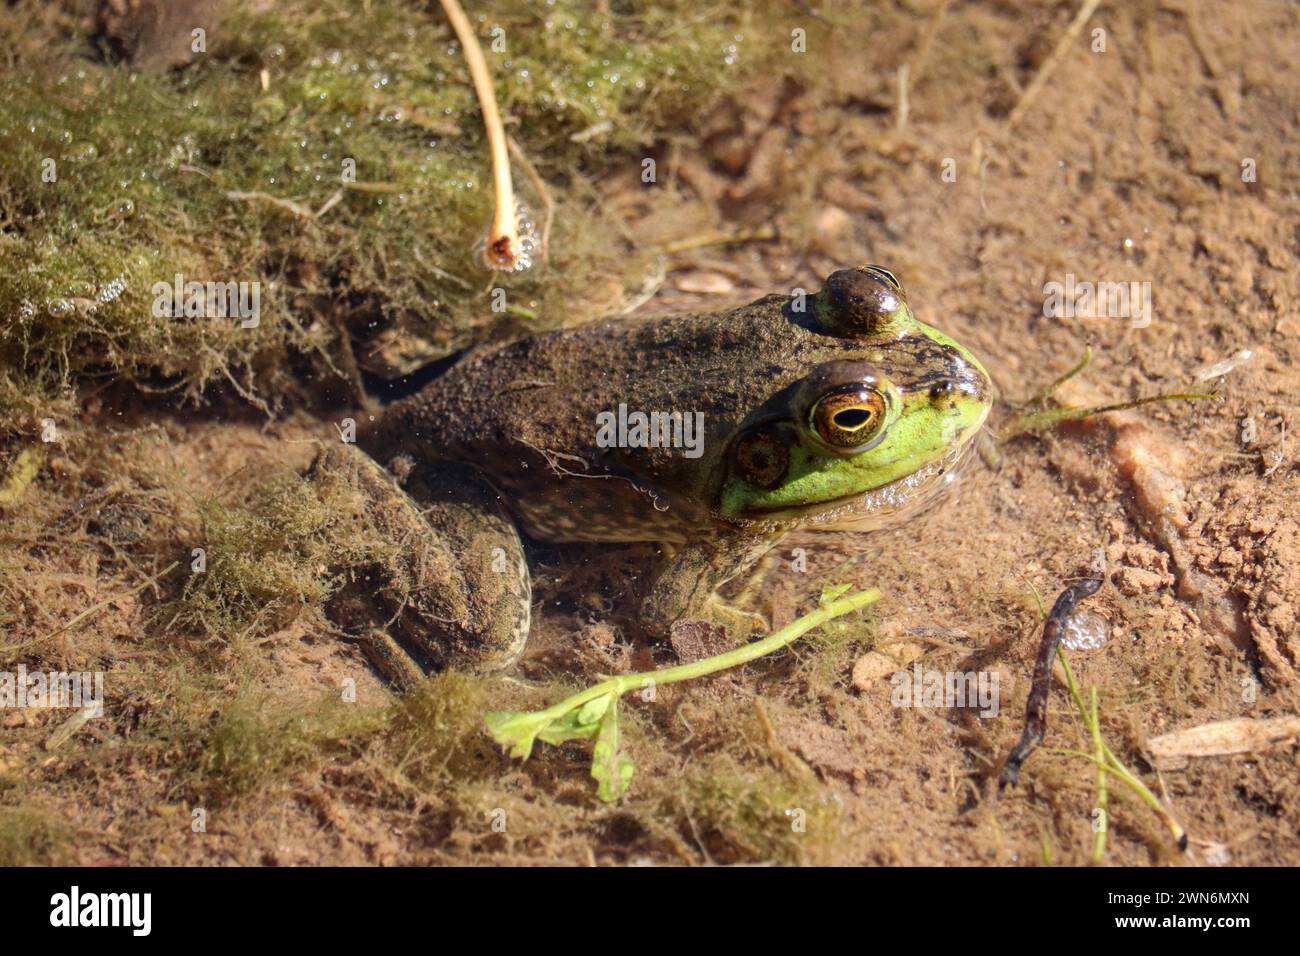 American bullfrog or Lithobates catesbeianus resting in a shallow pond at the veteran's oasis park in Arizona. Stock Photo